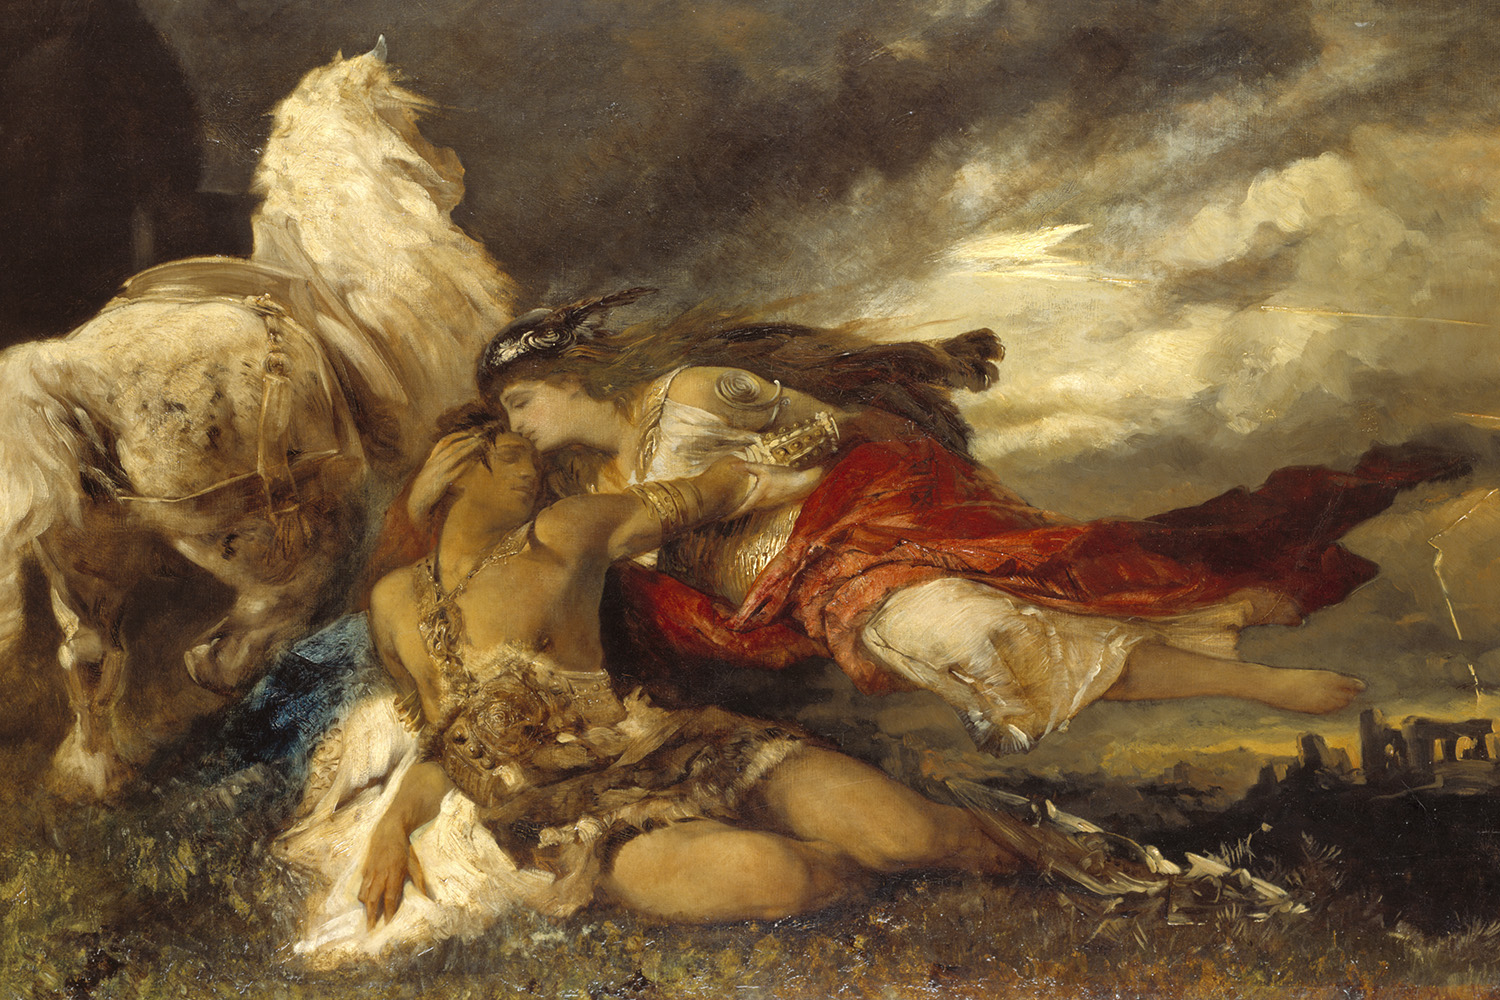 Valkyrie and a Dying Hero by Hans Makart, c.1877.